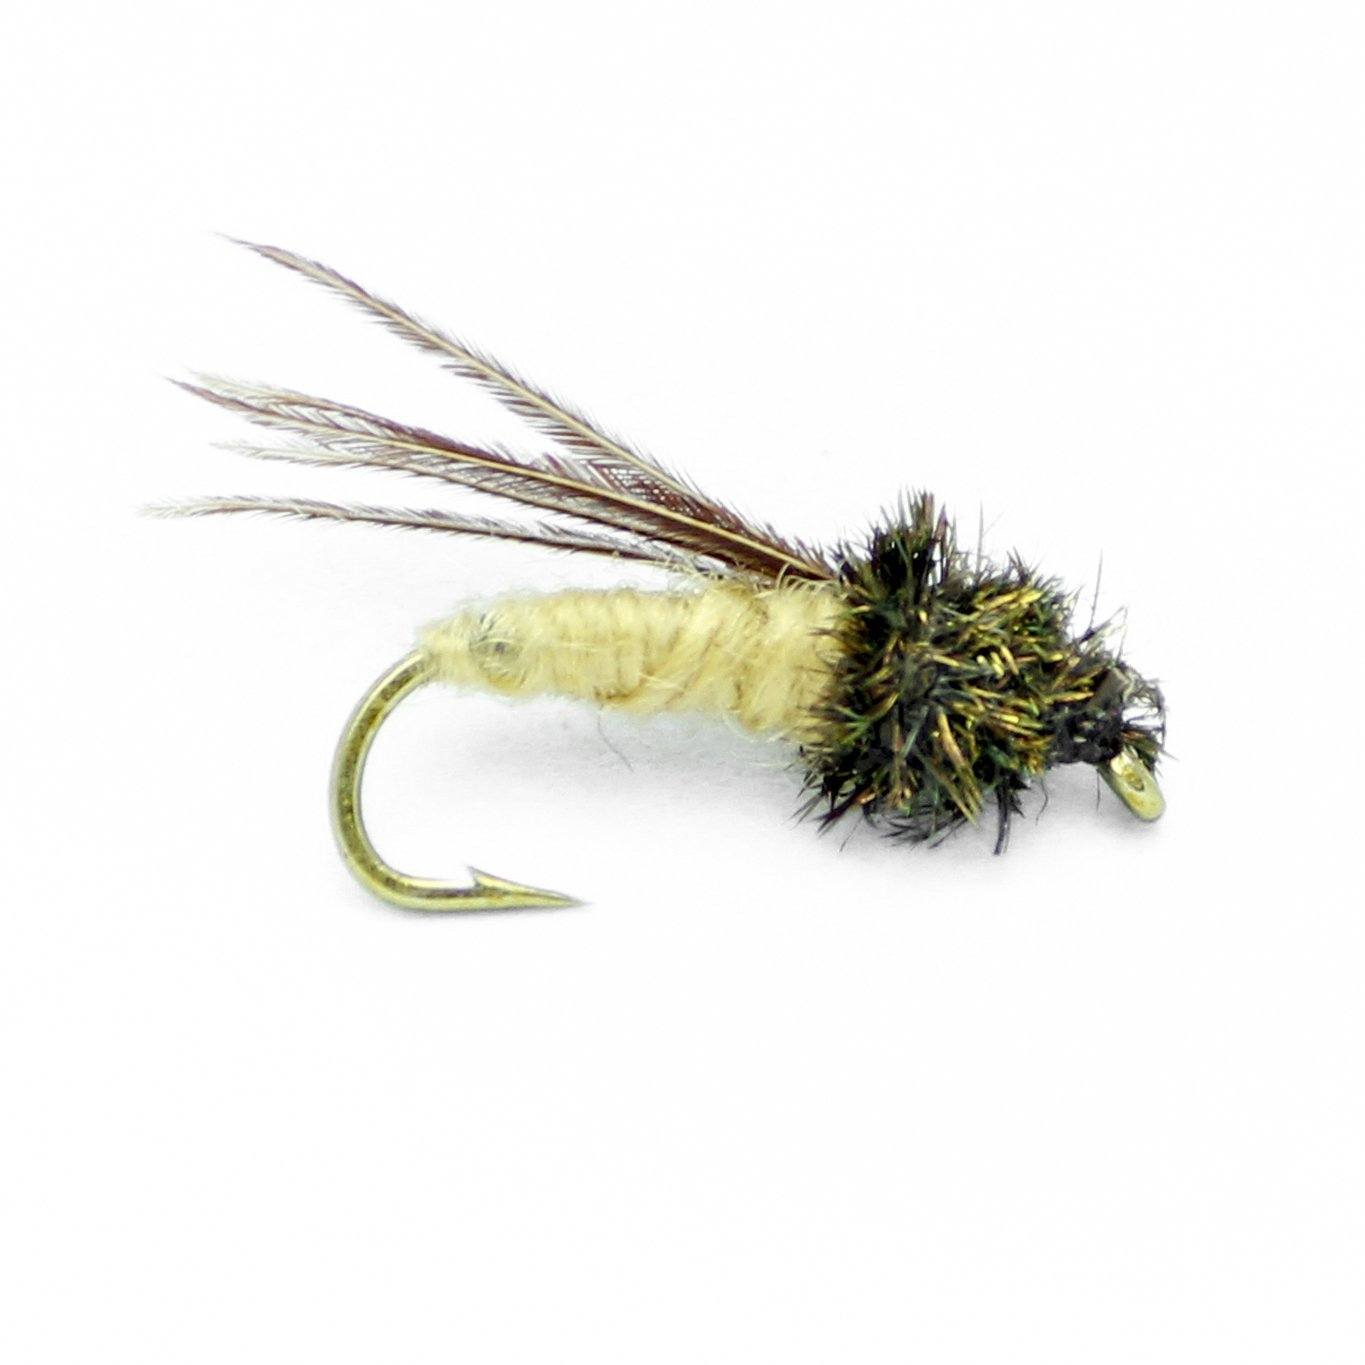 Outdoor Planet Favorite Fly Fishing Flies Assortment | Dry, Wet, Nymphs, Streamers, Wooly Buggers, Hopper, Caddis | Trout, Steelhead, Bass Fishing